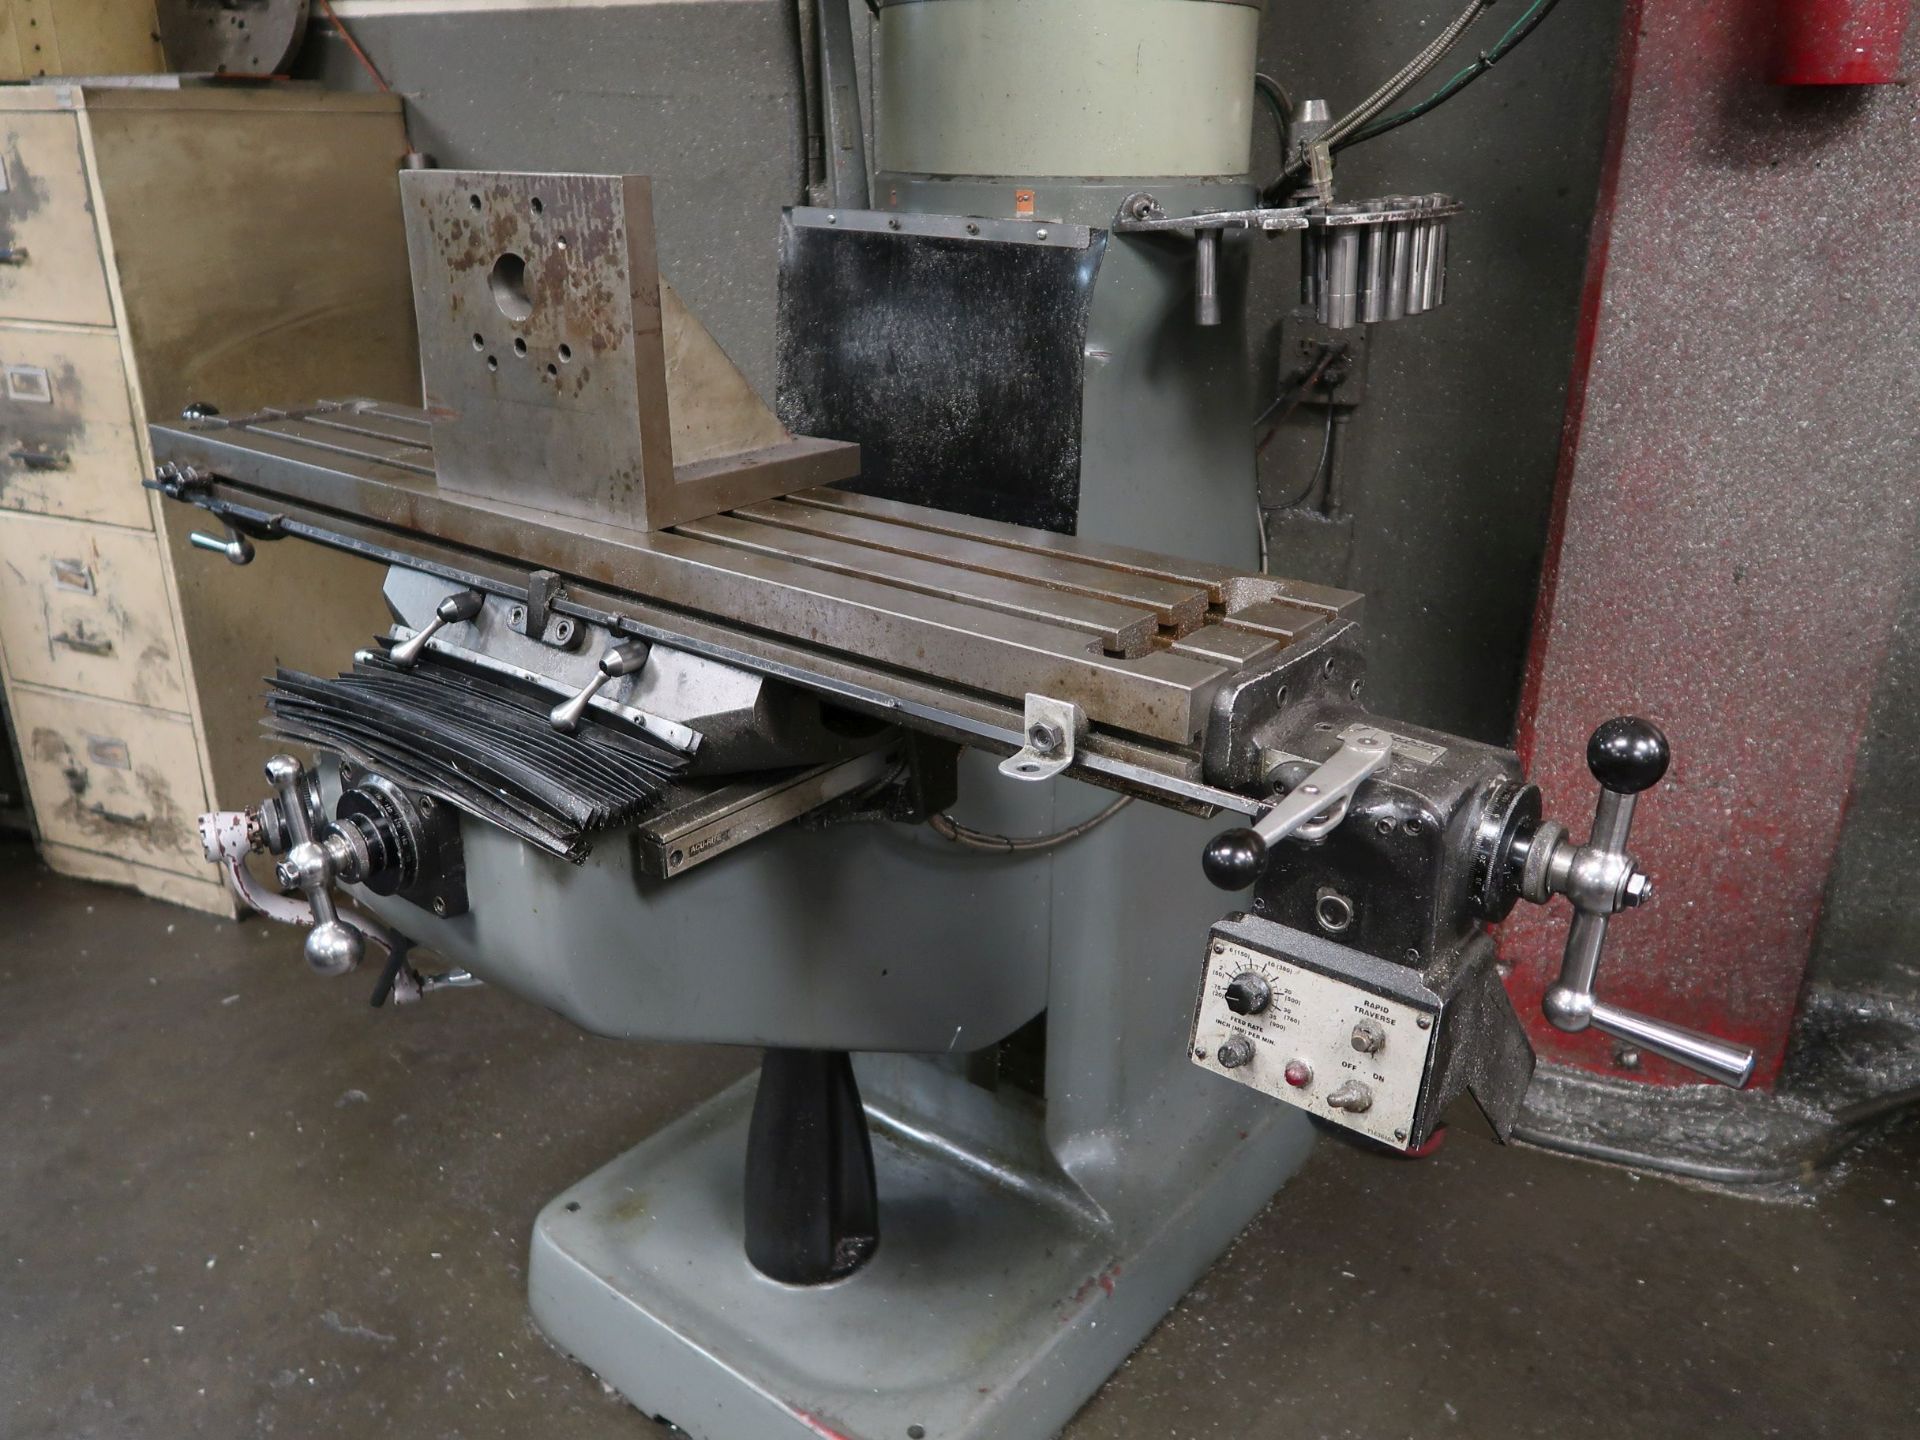 2 HP BRIDGEPORT VERTICAL MILLING MACHINE; S/N HDNG0114, SPINDLE SEEP 60-4,200 RPM, 9" X 42" POWER - Image 6 of 7